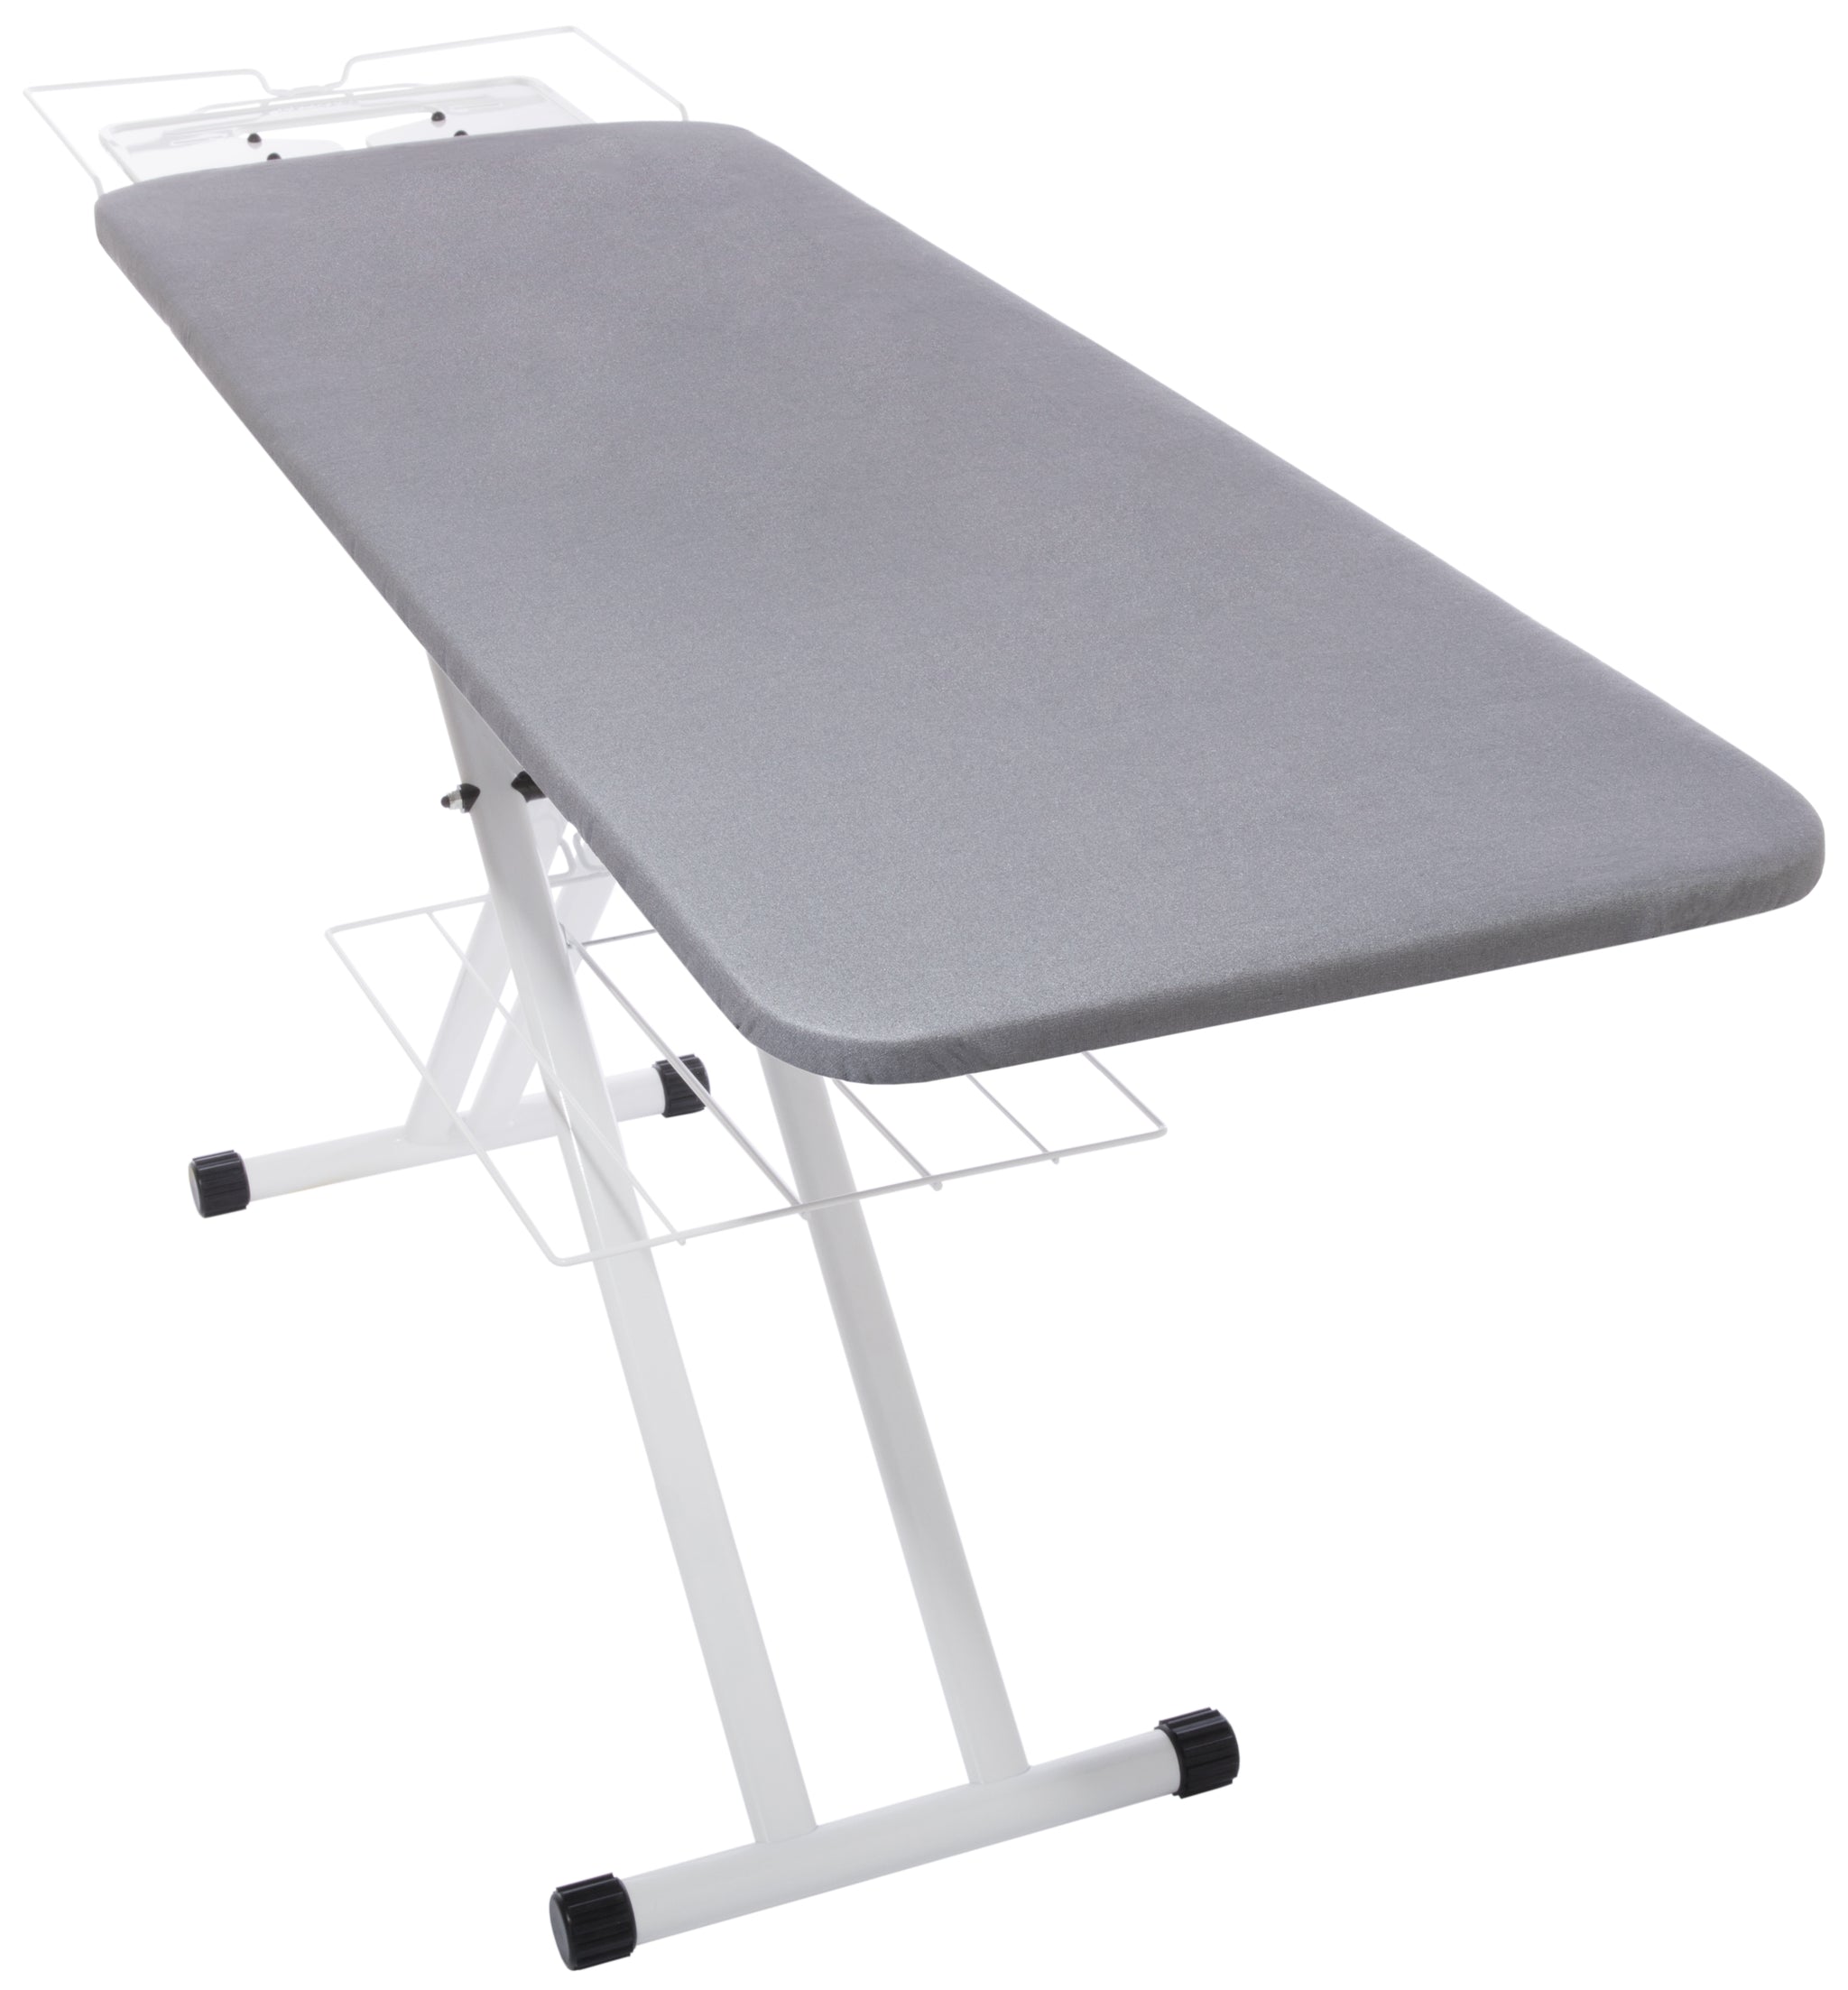 Ezy Iron Ironing Board Cover and Pad - Cuts Ironing Time in Half - 15x54  inch